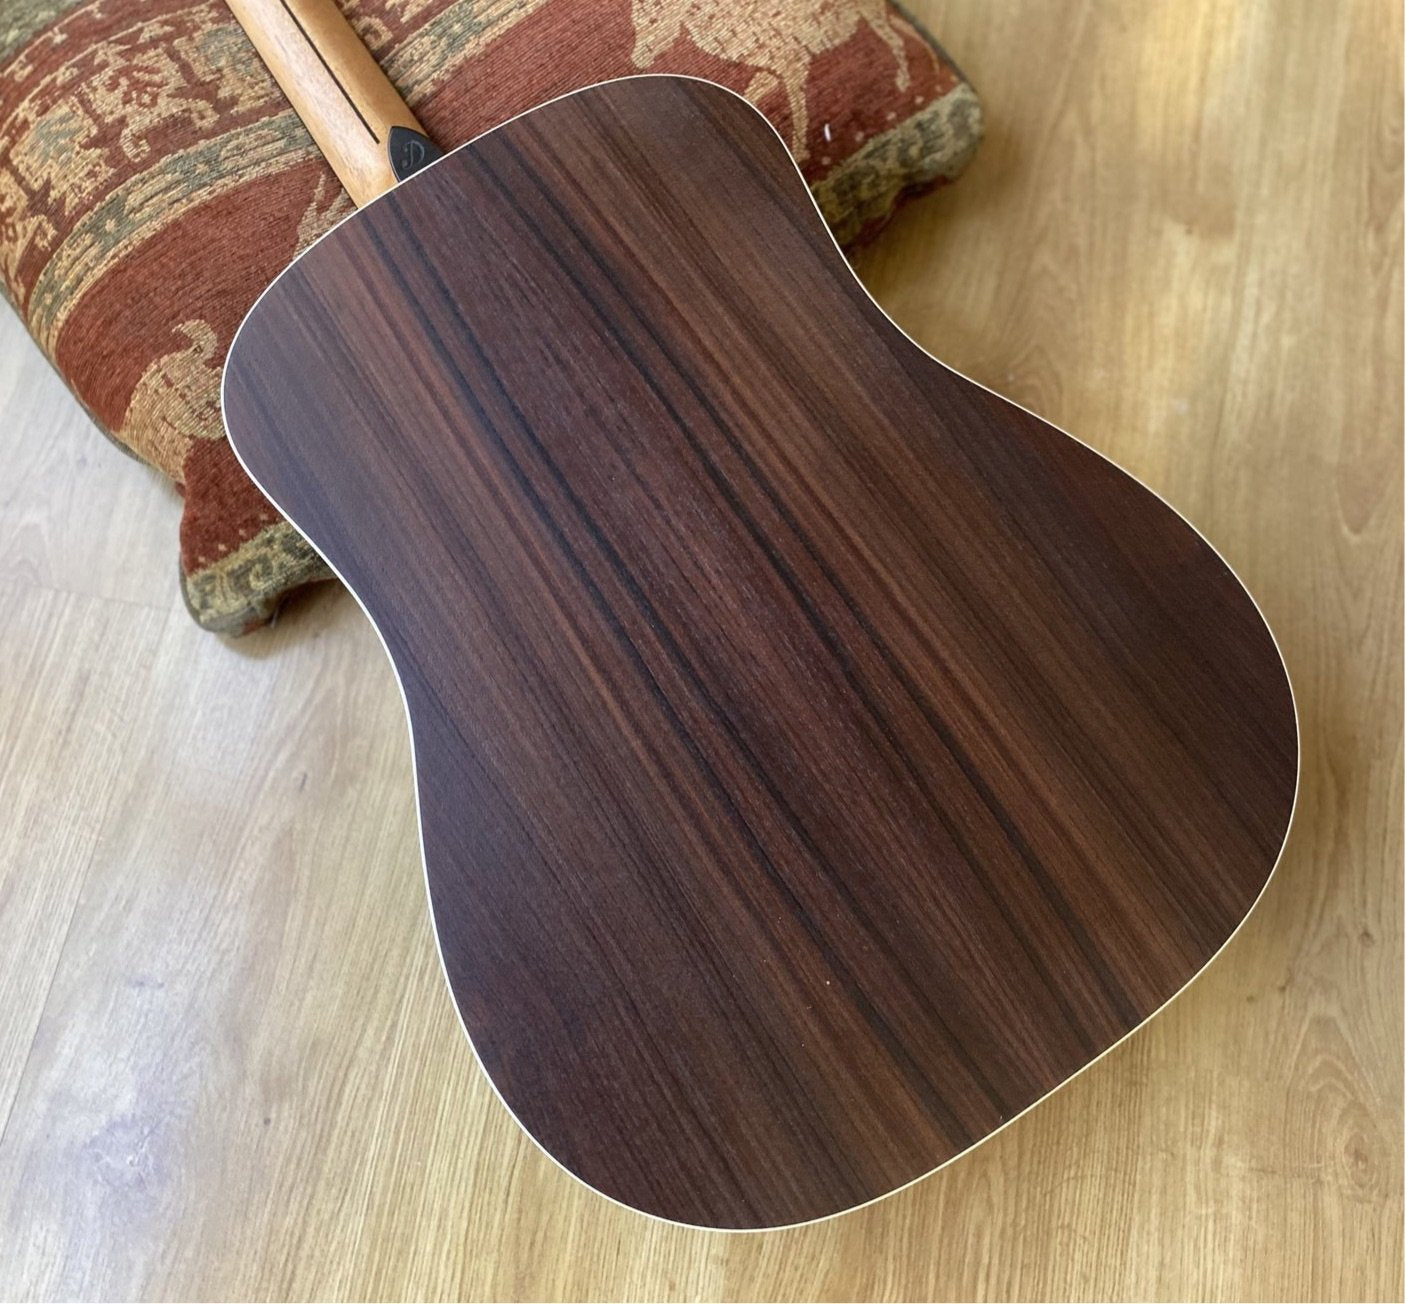 Dowina Rosewood (Ceres) Dreadnought, Acoustic Guitar for sale at Richards Guitars.